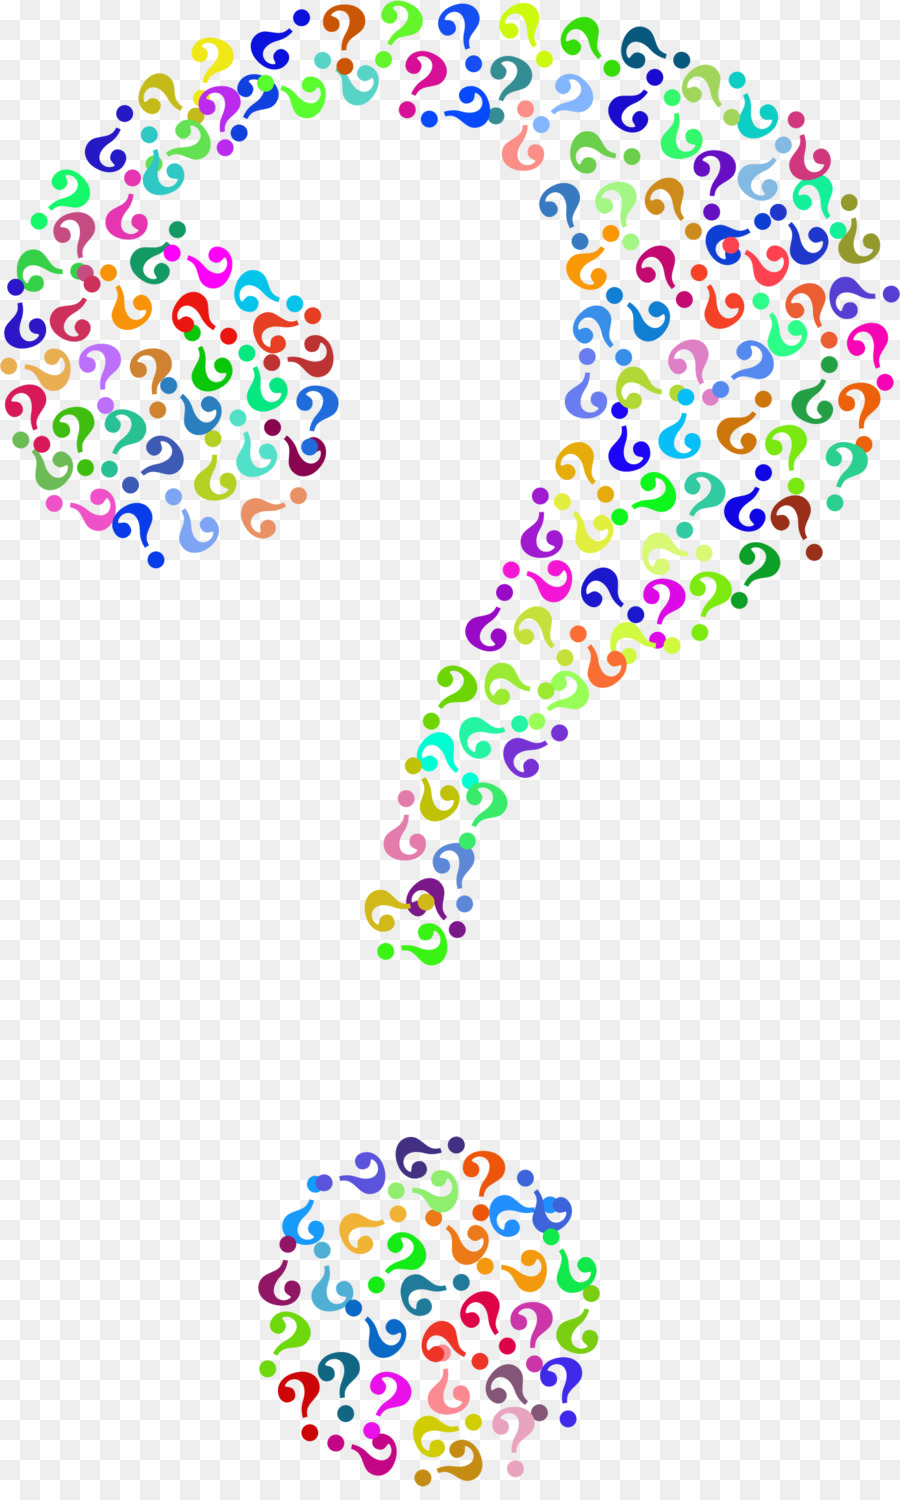 Question mark Computer Icons Clip art - others png download - 1386*2290 - Free Transparent Question Mark png Download.